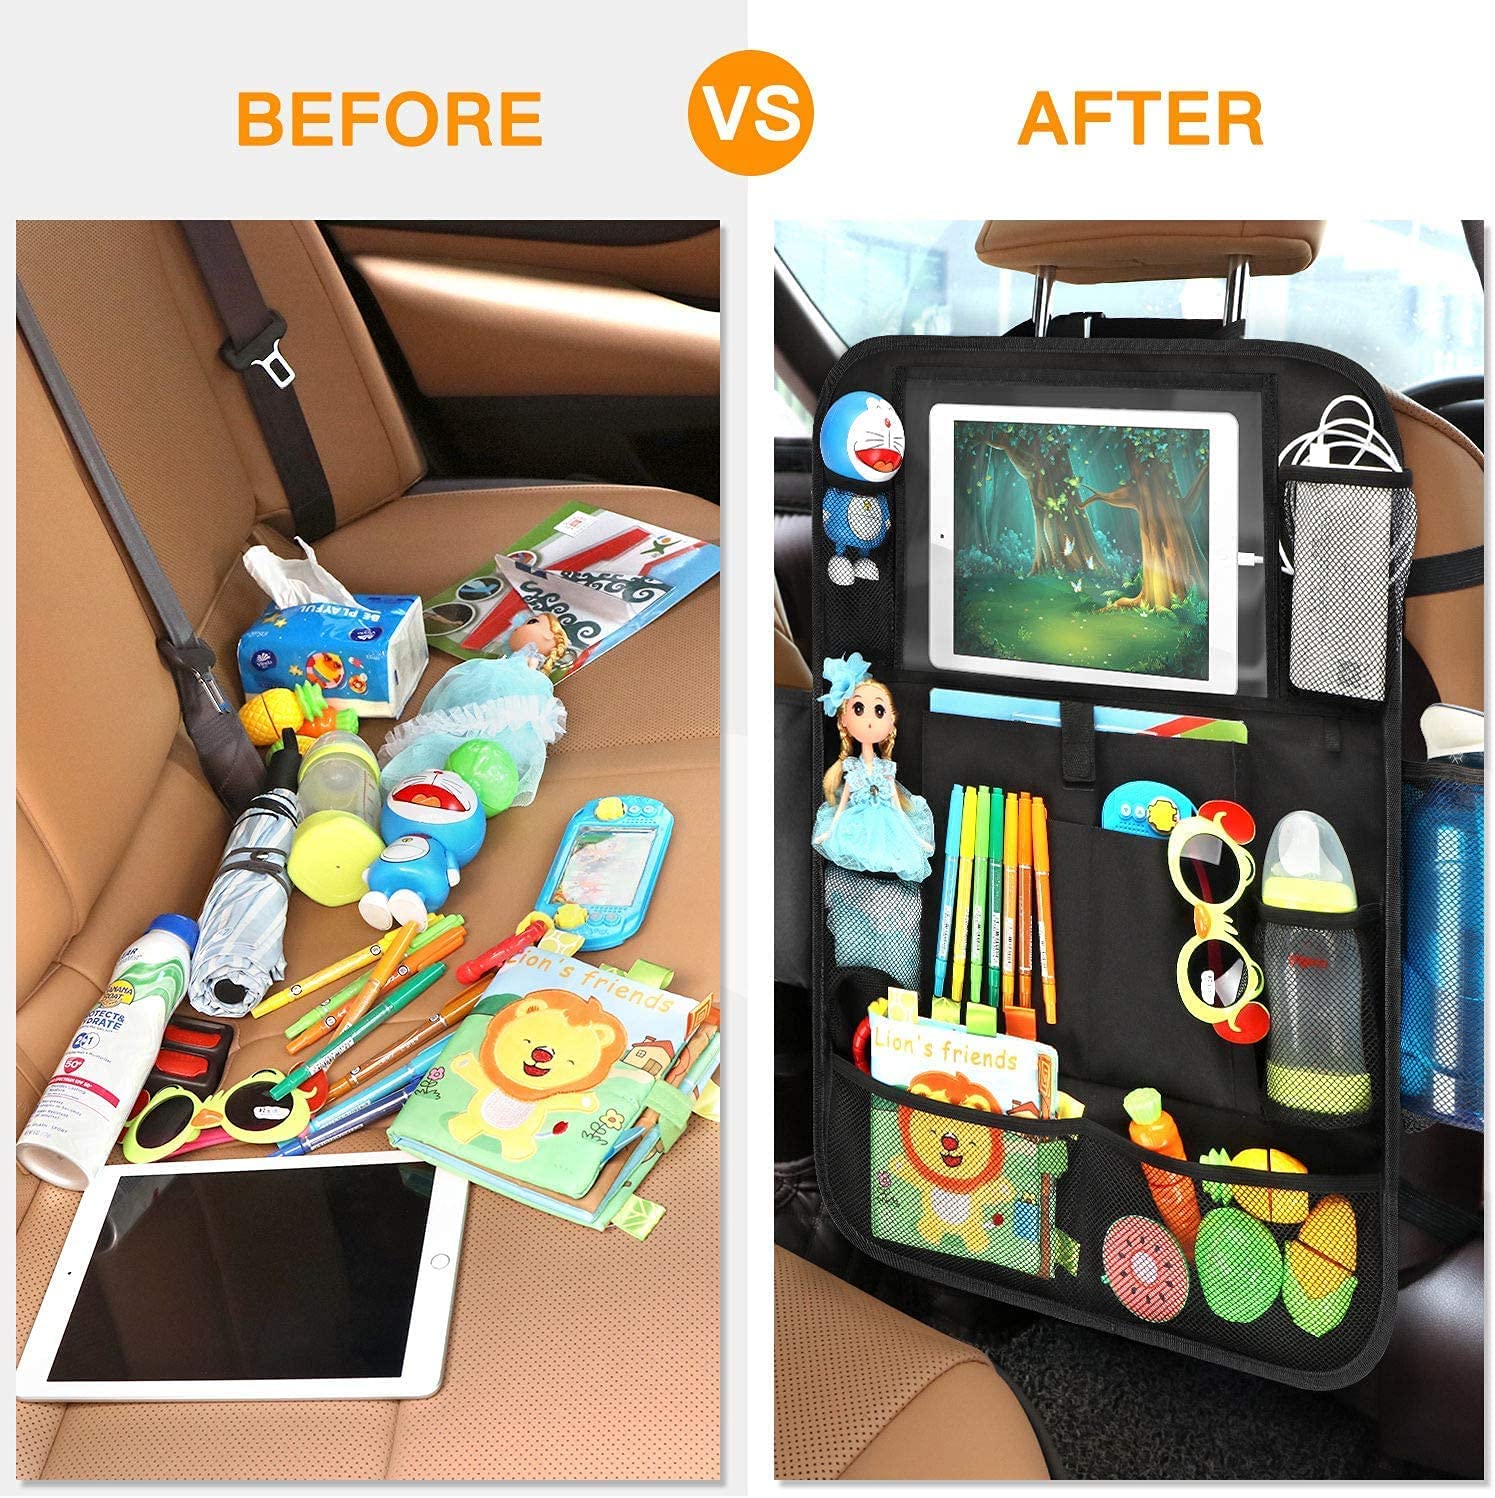 A before and after comparison of the backseat of a car. The before image shows a messy untidy backseat. The after image shows all the items neatly stowed away inside the organizer.